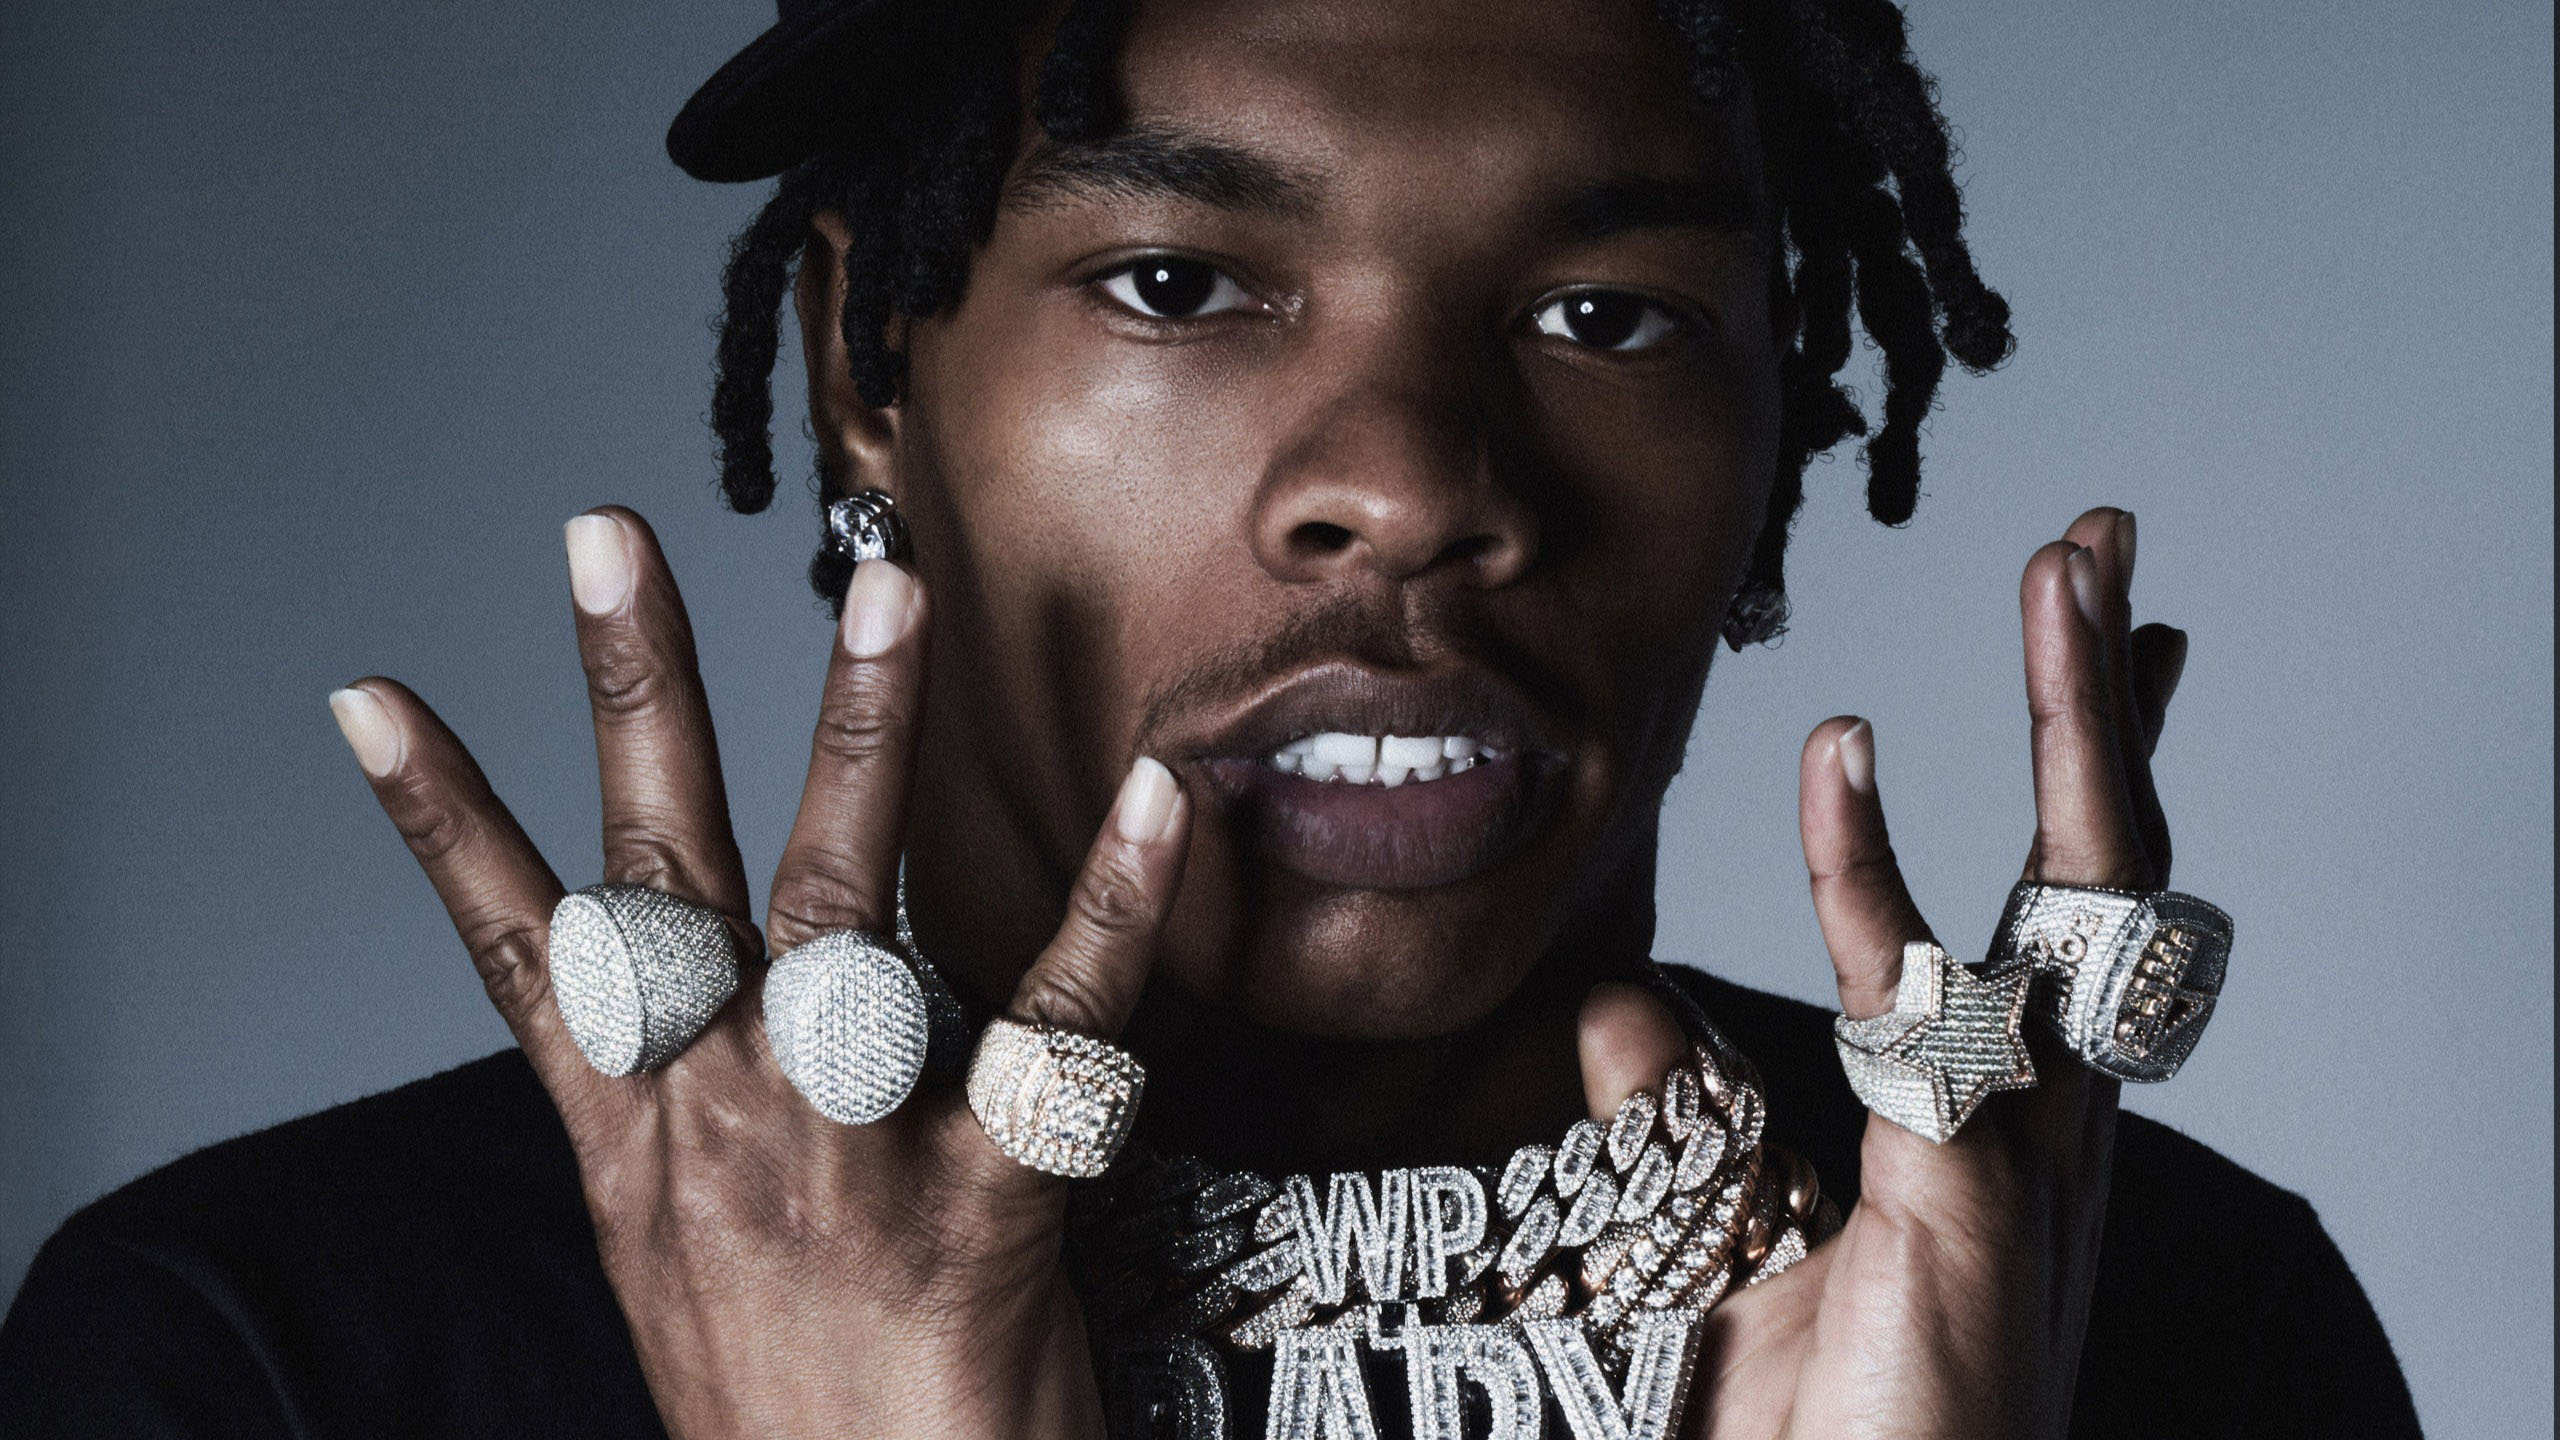 Dominique Armani Jones (born December 3, 1994), known professionally as Lil Baby, is an American rapper, singer, and songwriter from Atlanta...